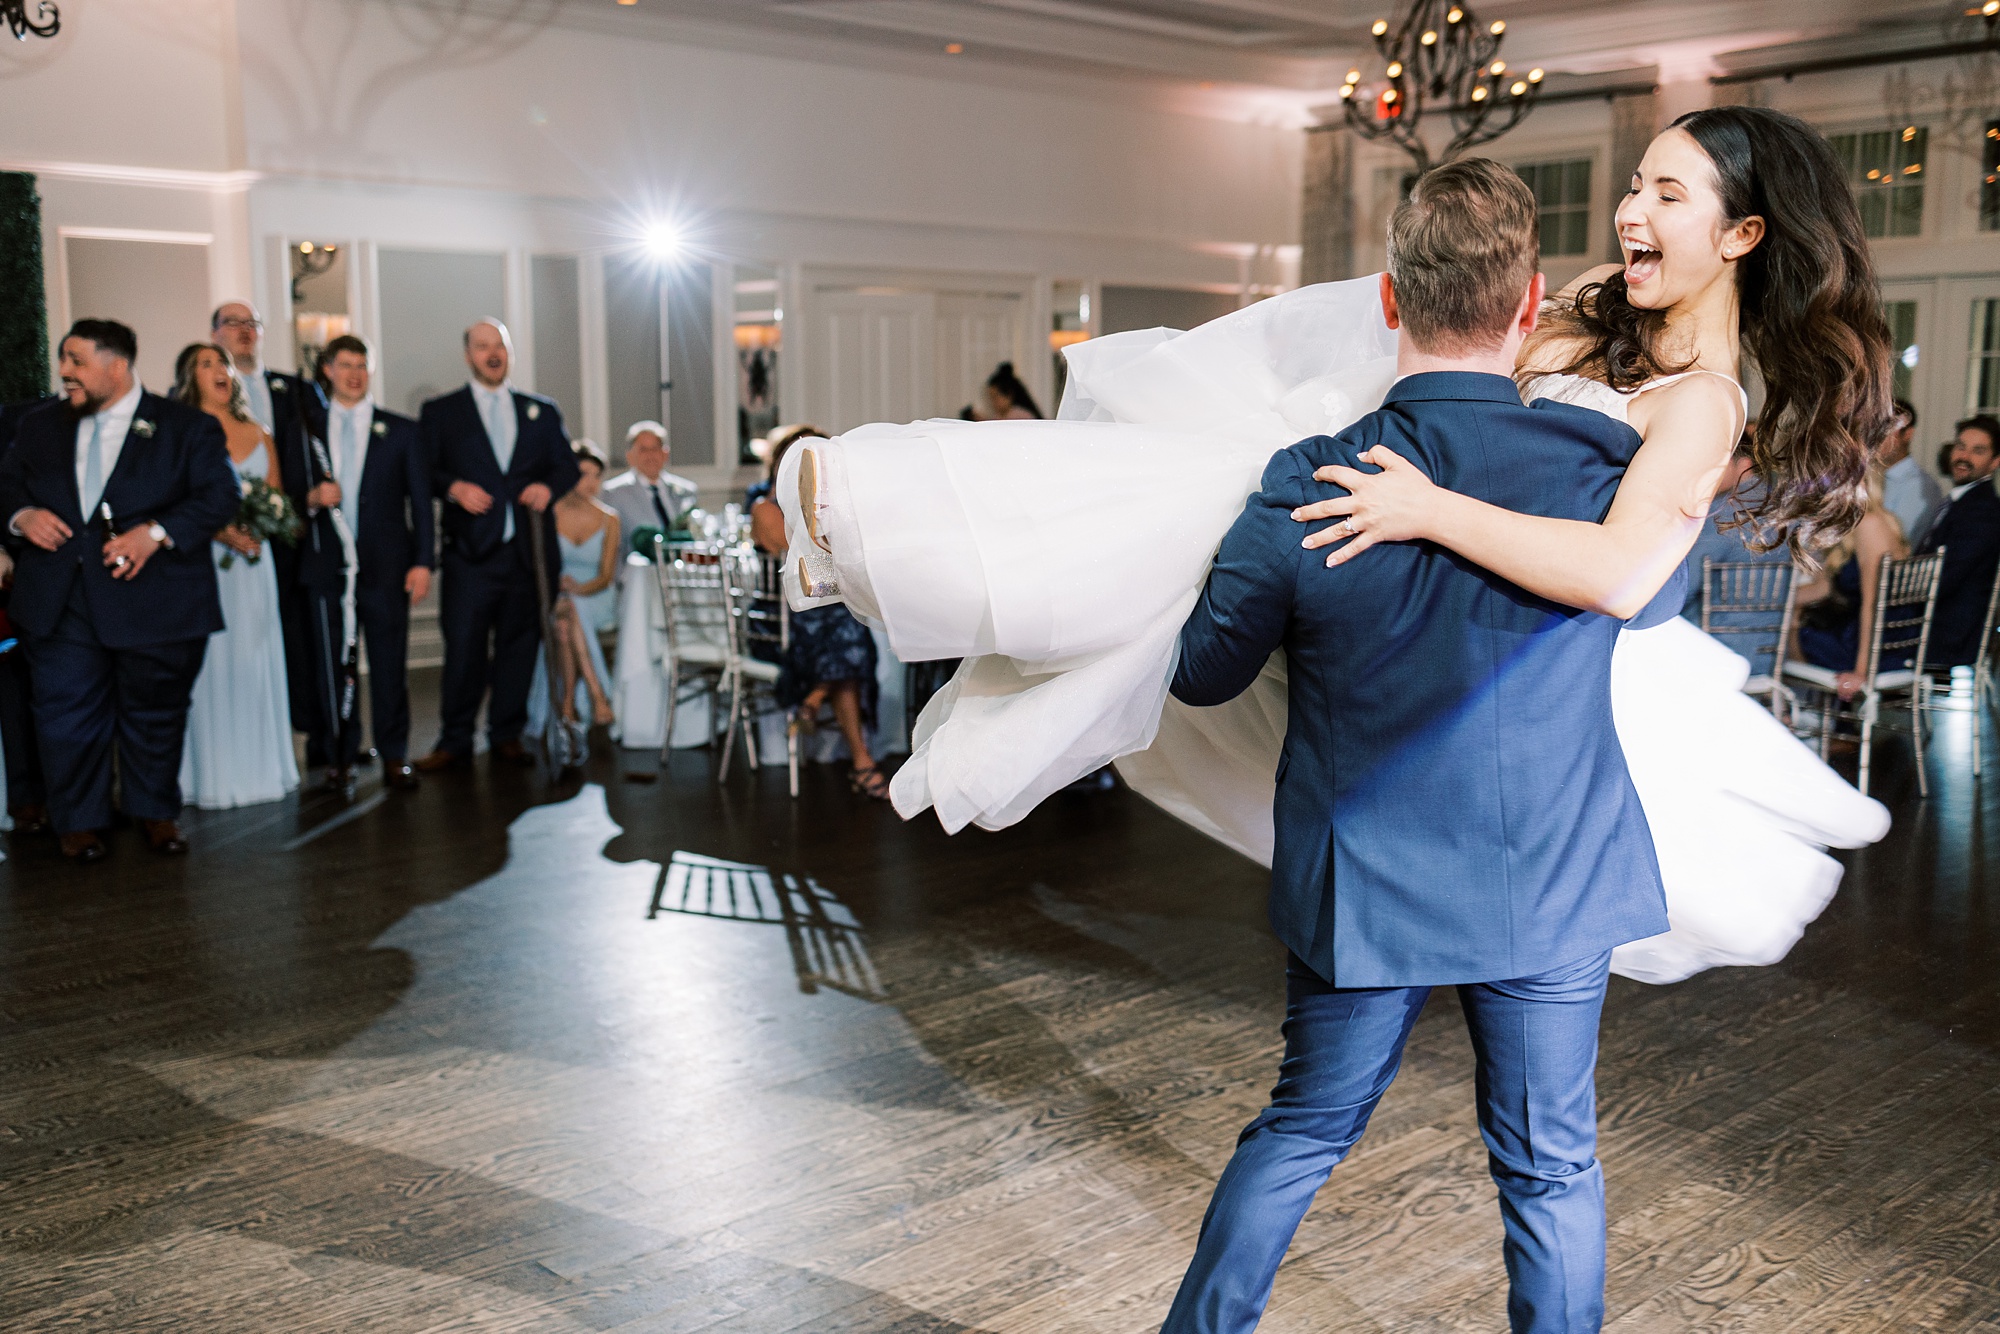 groom lifts bride twirling her during Chester County PA wedding reception